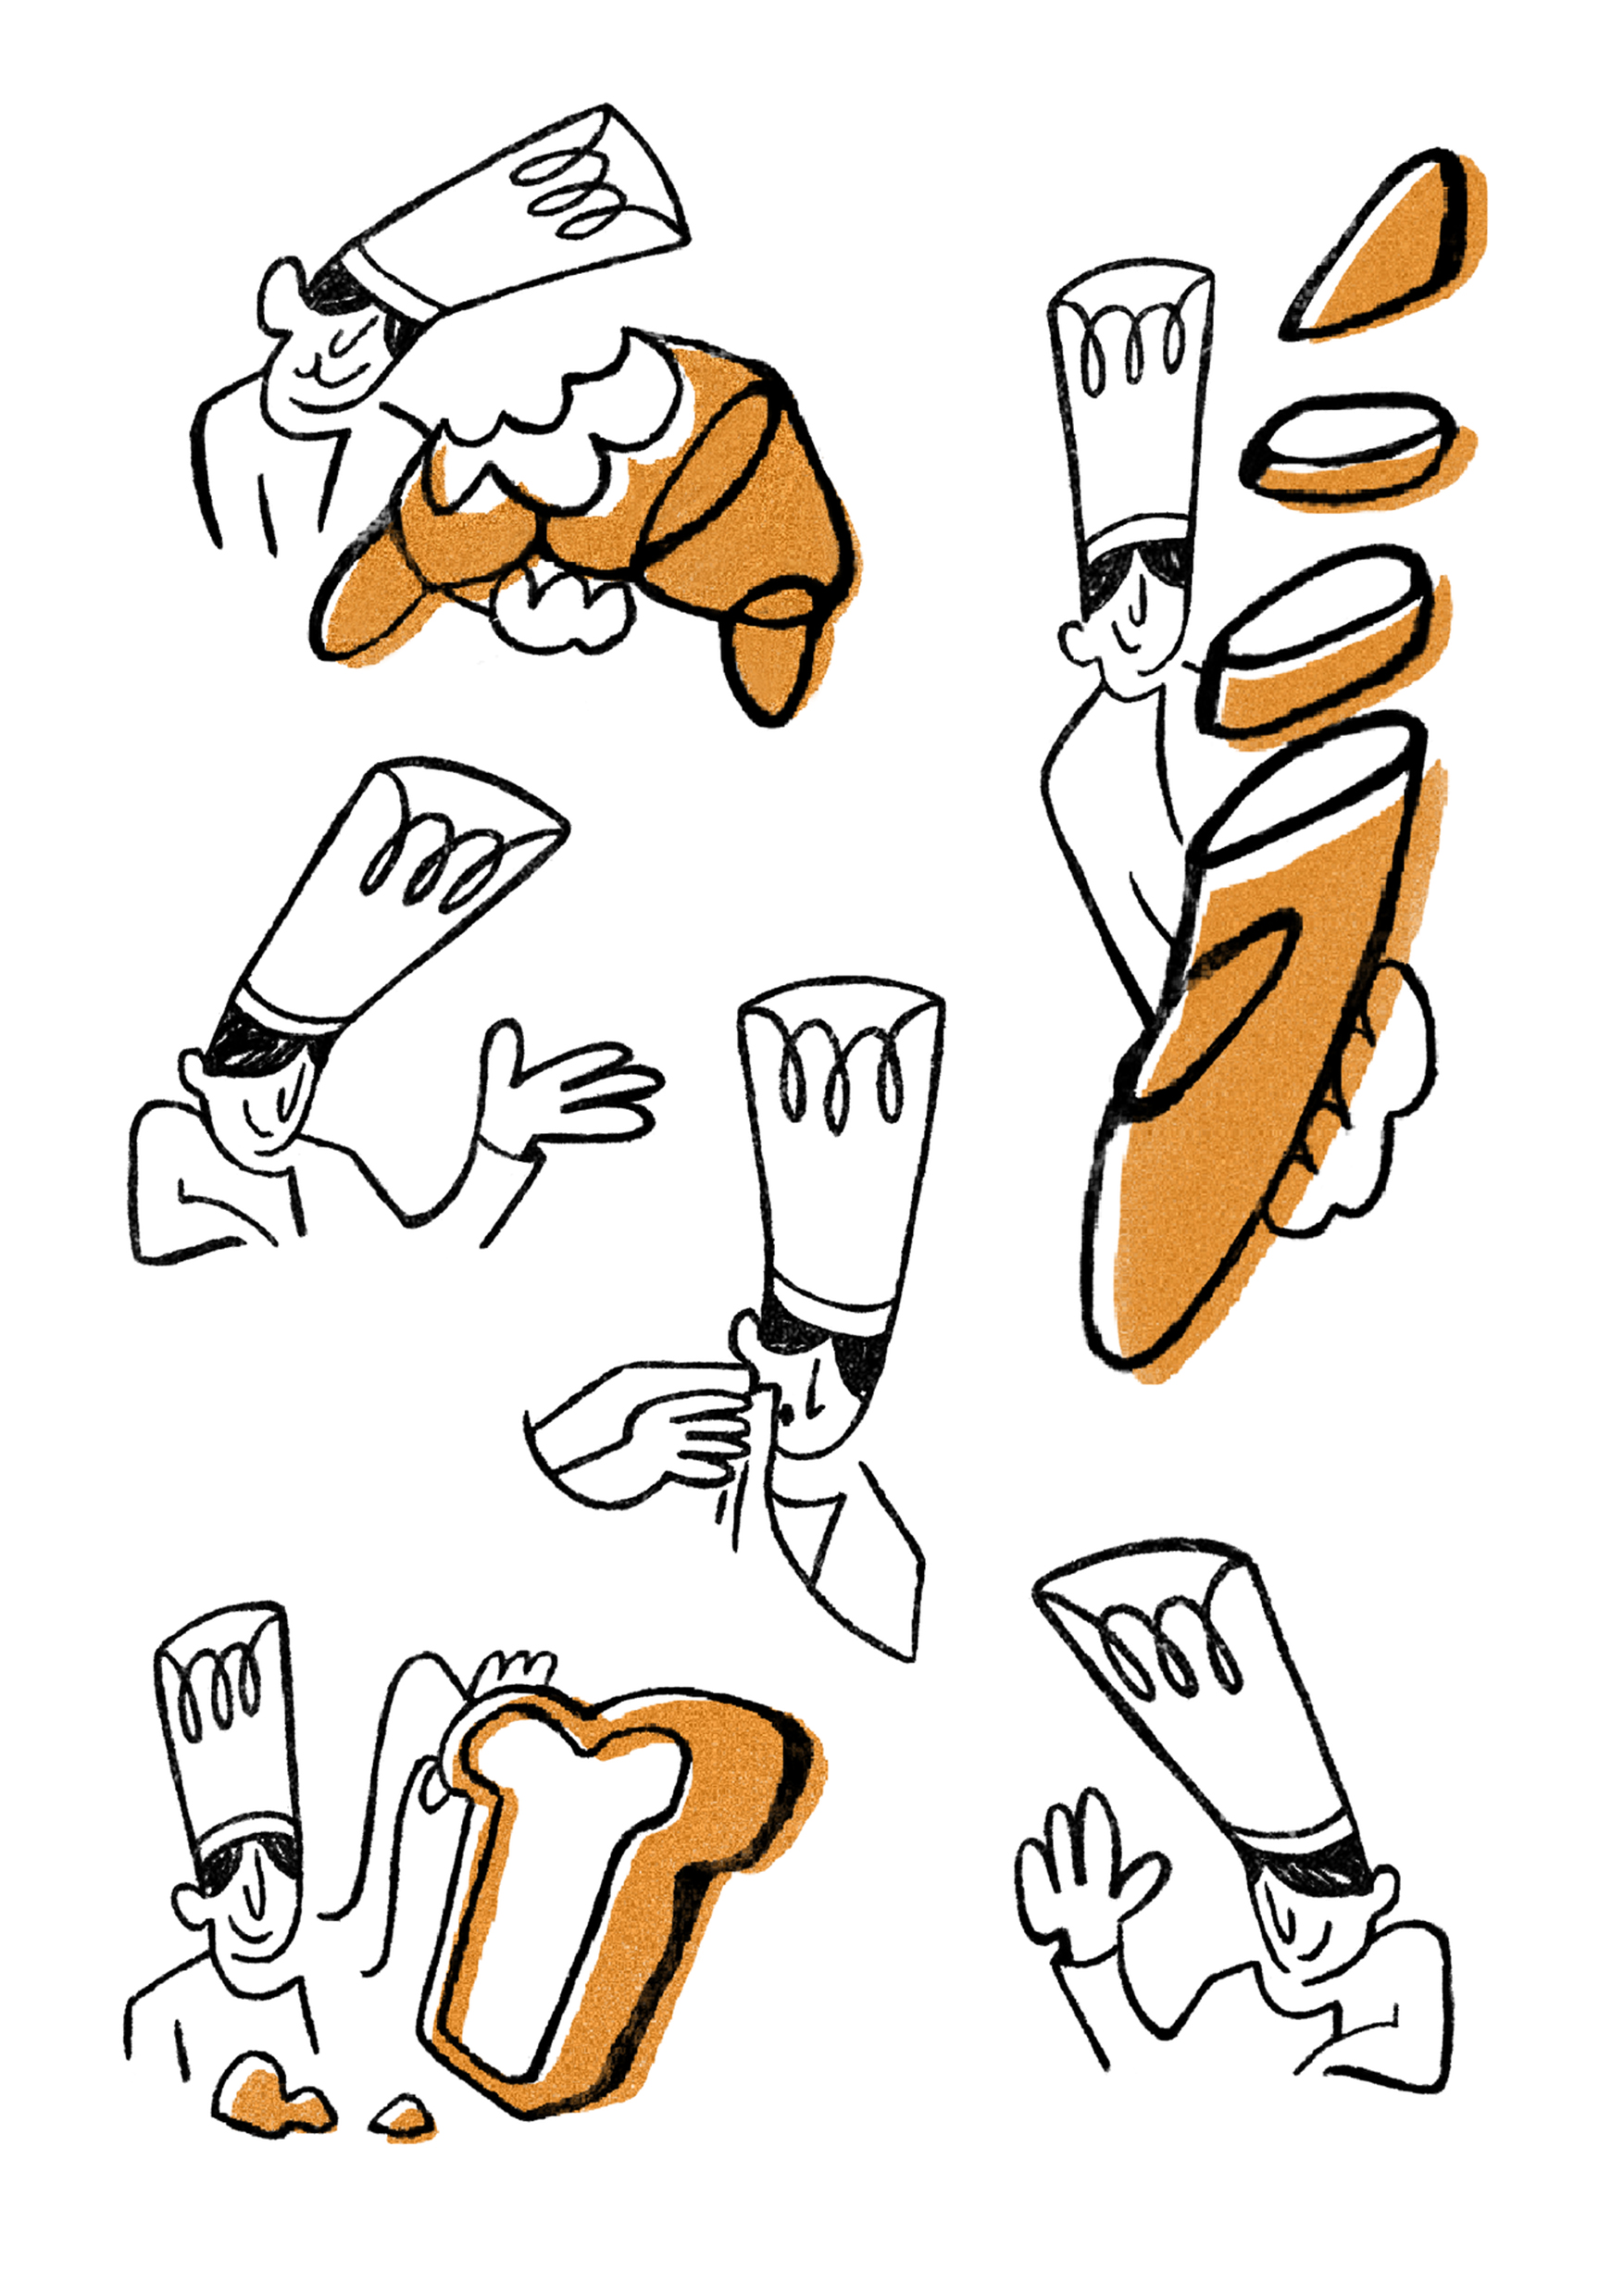 Spot illustrations by Andrea Hammersley showing chef character in various poses with baked goods in simple line drawings.